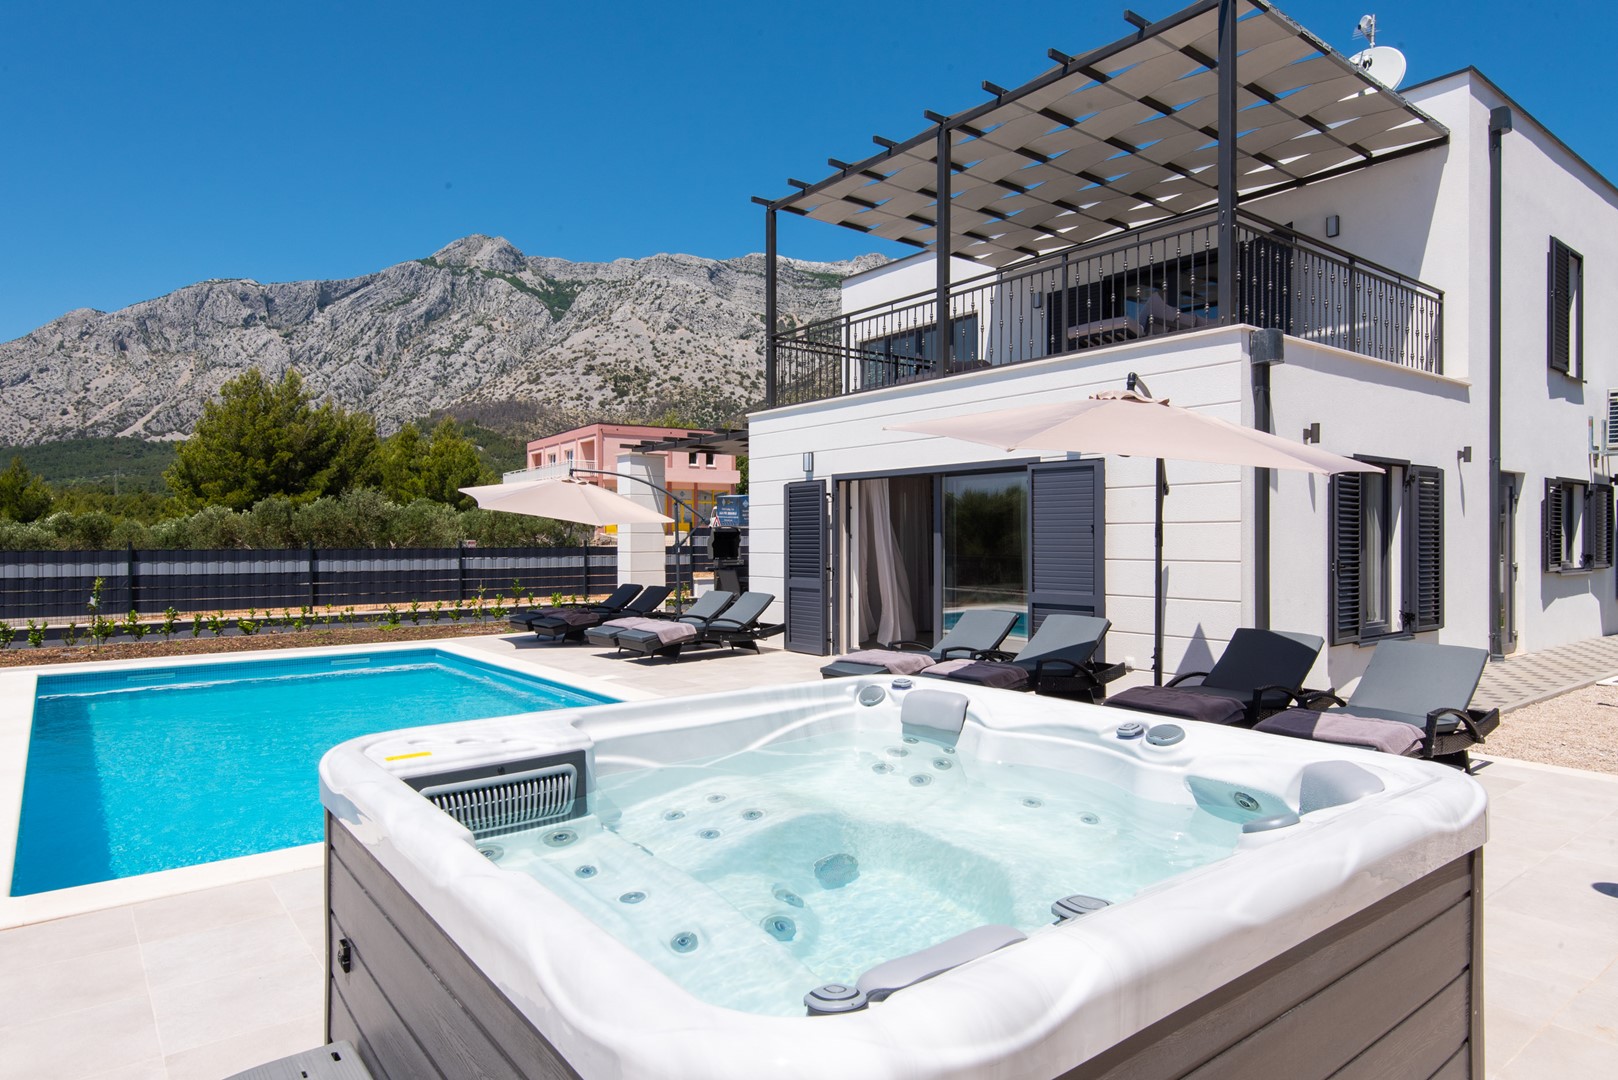 A view of the jacuzzi and the private pool surrounded by deckchairs for sunbathing on the outdoor terrace of the luxury villa for rent and vacation Callisto Orebic